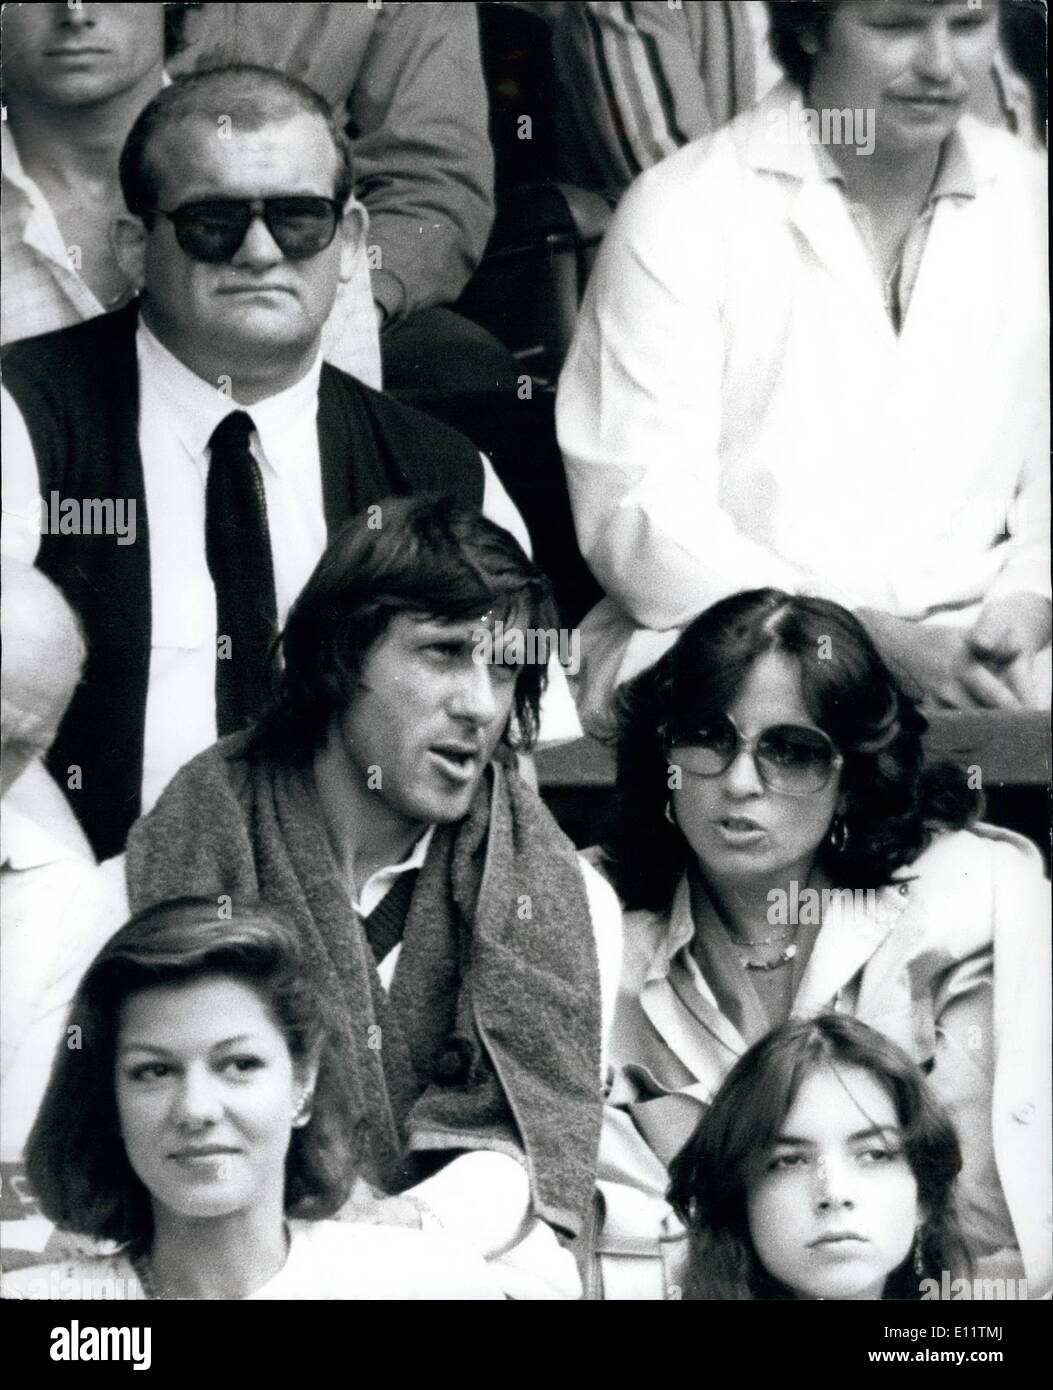 Jul. 07, 1980 - Ilie Nastass the Romanian tennis star, and is parted from his wife Dominique, who is seeking a divores is seen with's girl friend as the watch the tennis on the centre at Wimbledon, Seated behind them is the massive from of Nastase bodyguard Bambind. Stock Photo